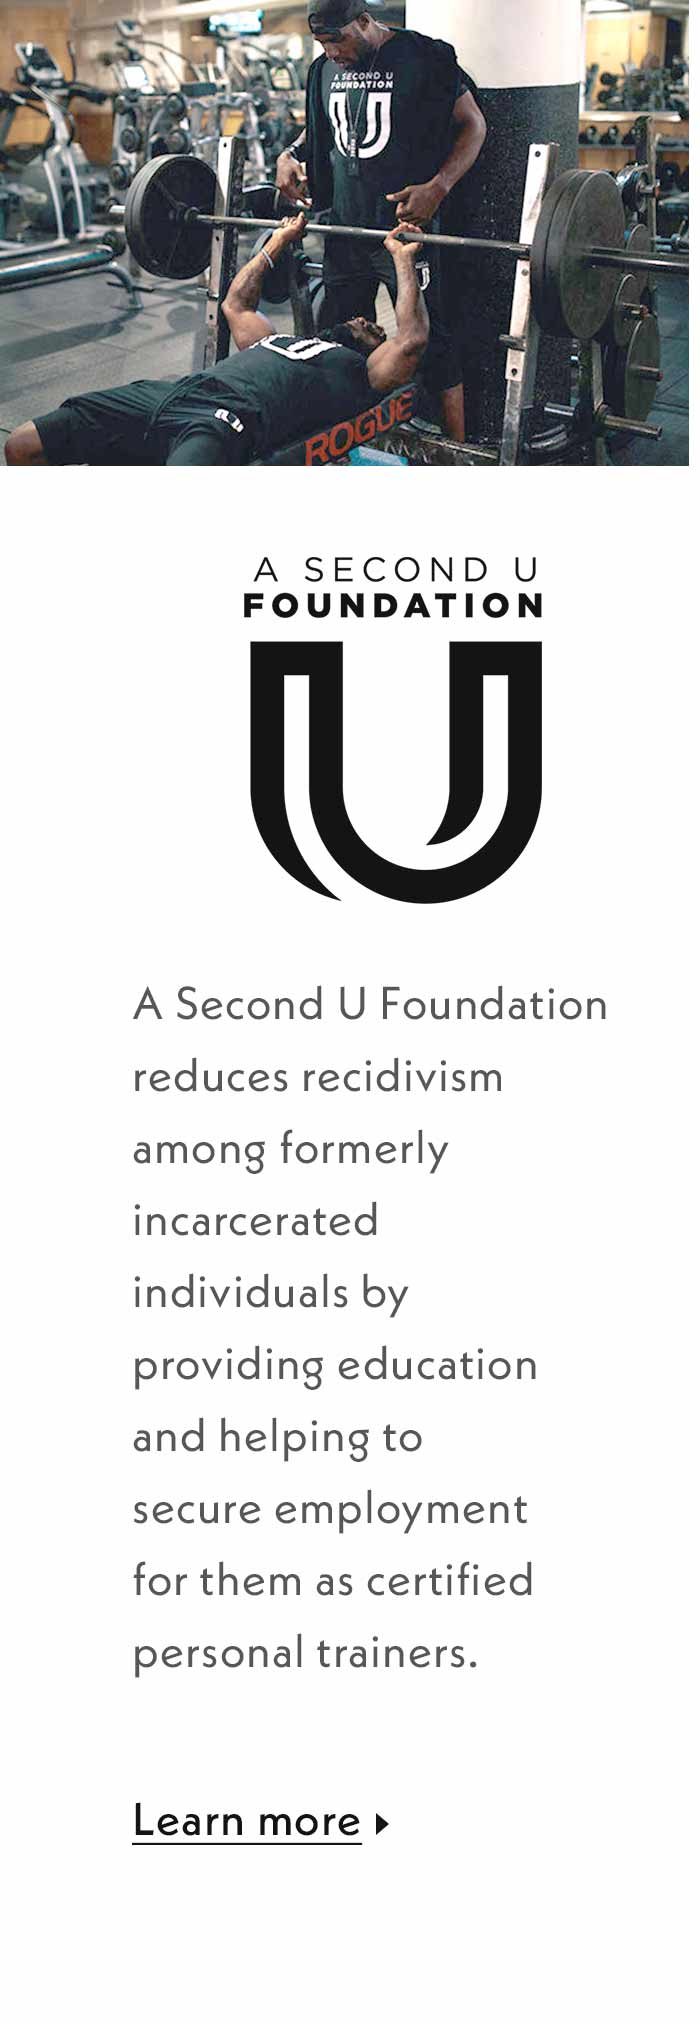 A Second U Foundation reduces recidivism among formerly incarcerated individuals by providing education and helping to secure employment for them as certified personal trainers. Learn more.